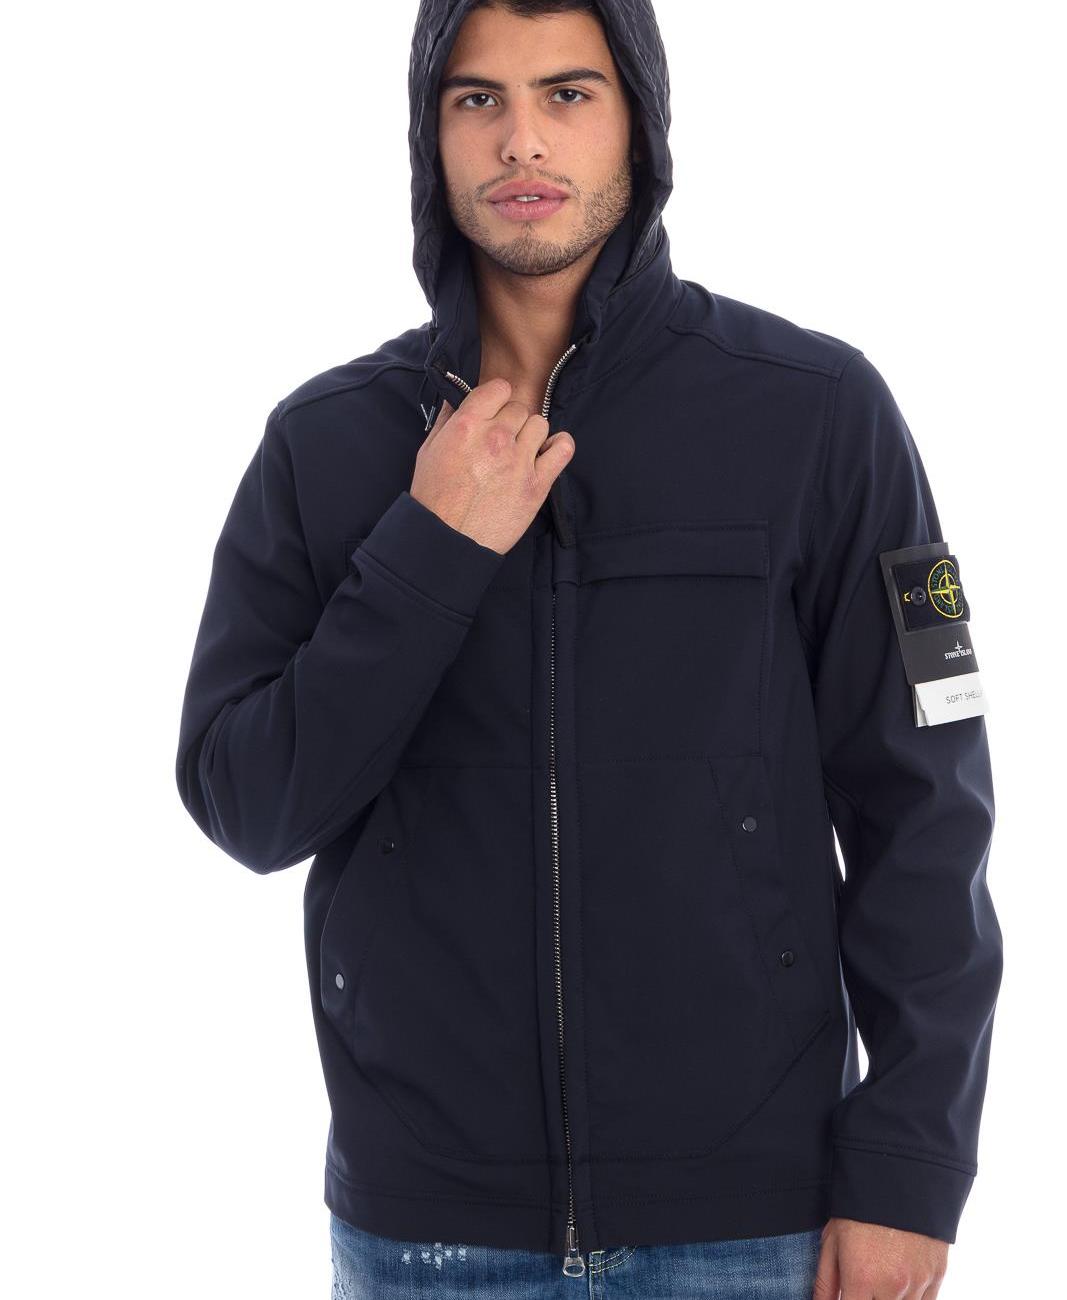 SOFT SHELL-R Insulating Lining Hooded Storage Jacket